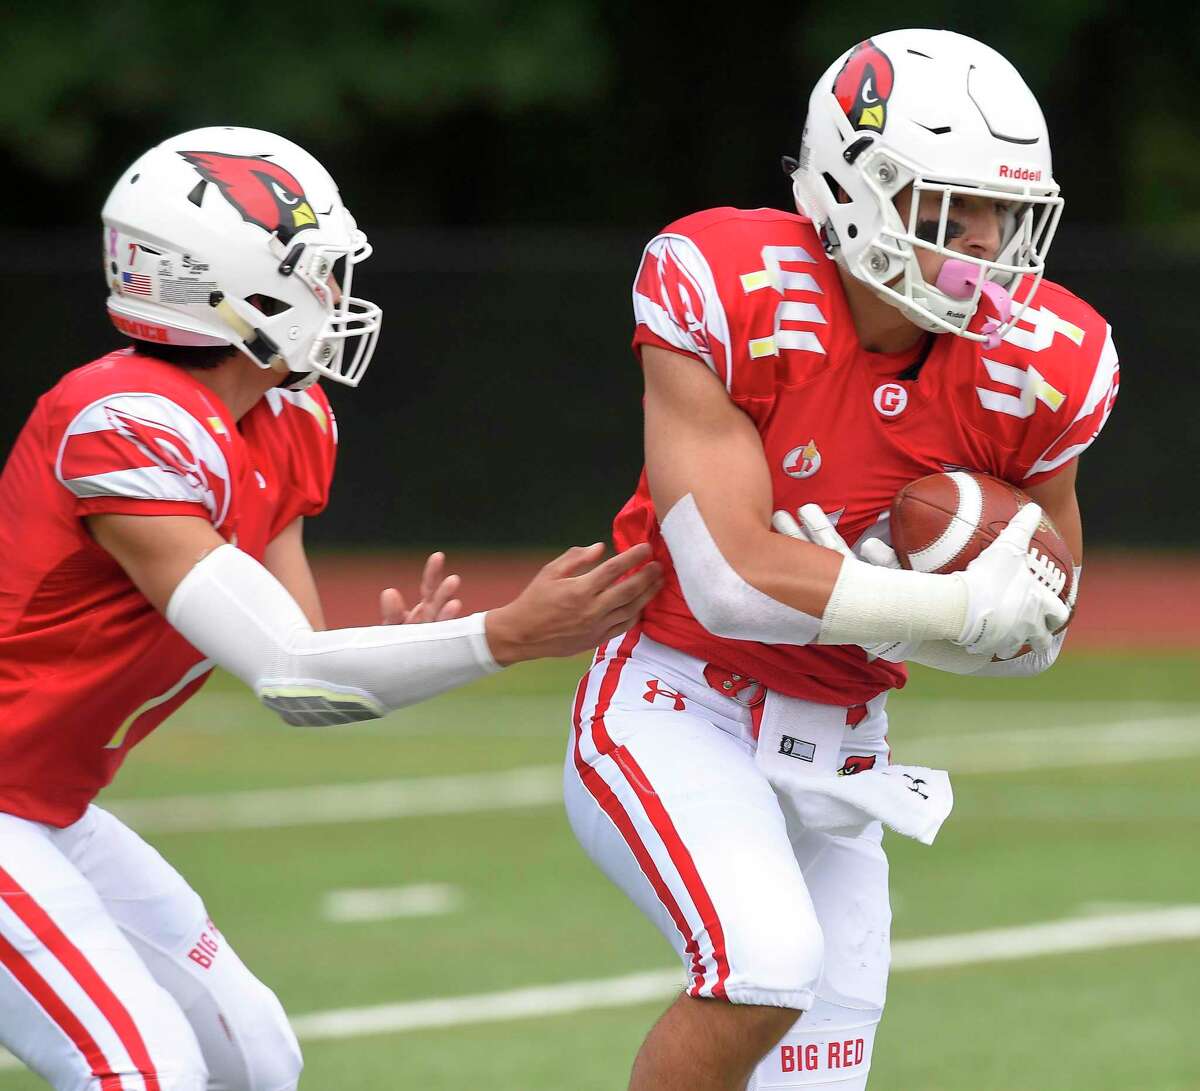 Greenwich’s Jack Warren (44) takes the handoff from quarterback James Rinello in the first quarter against Danbury in a FCIAC football game season-opener at Cardinal Stadium on Sept. 14, 2019 in Greenwich, Connecticut.